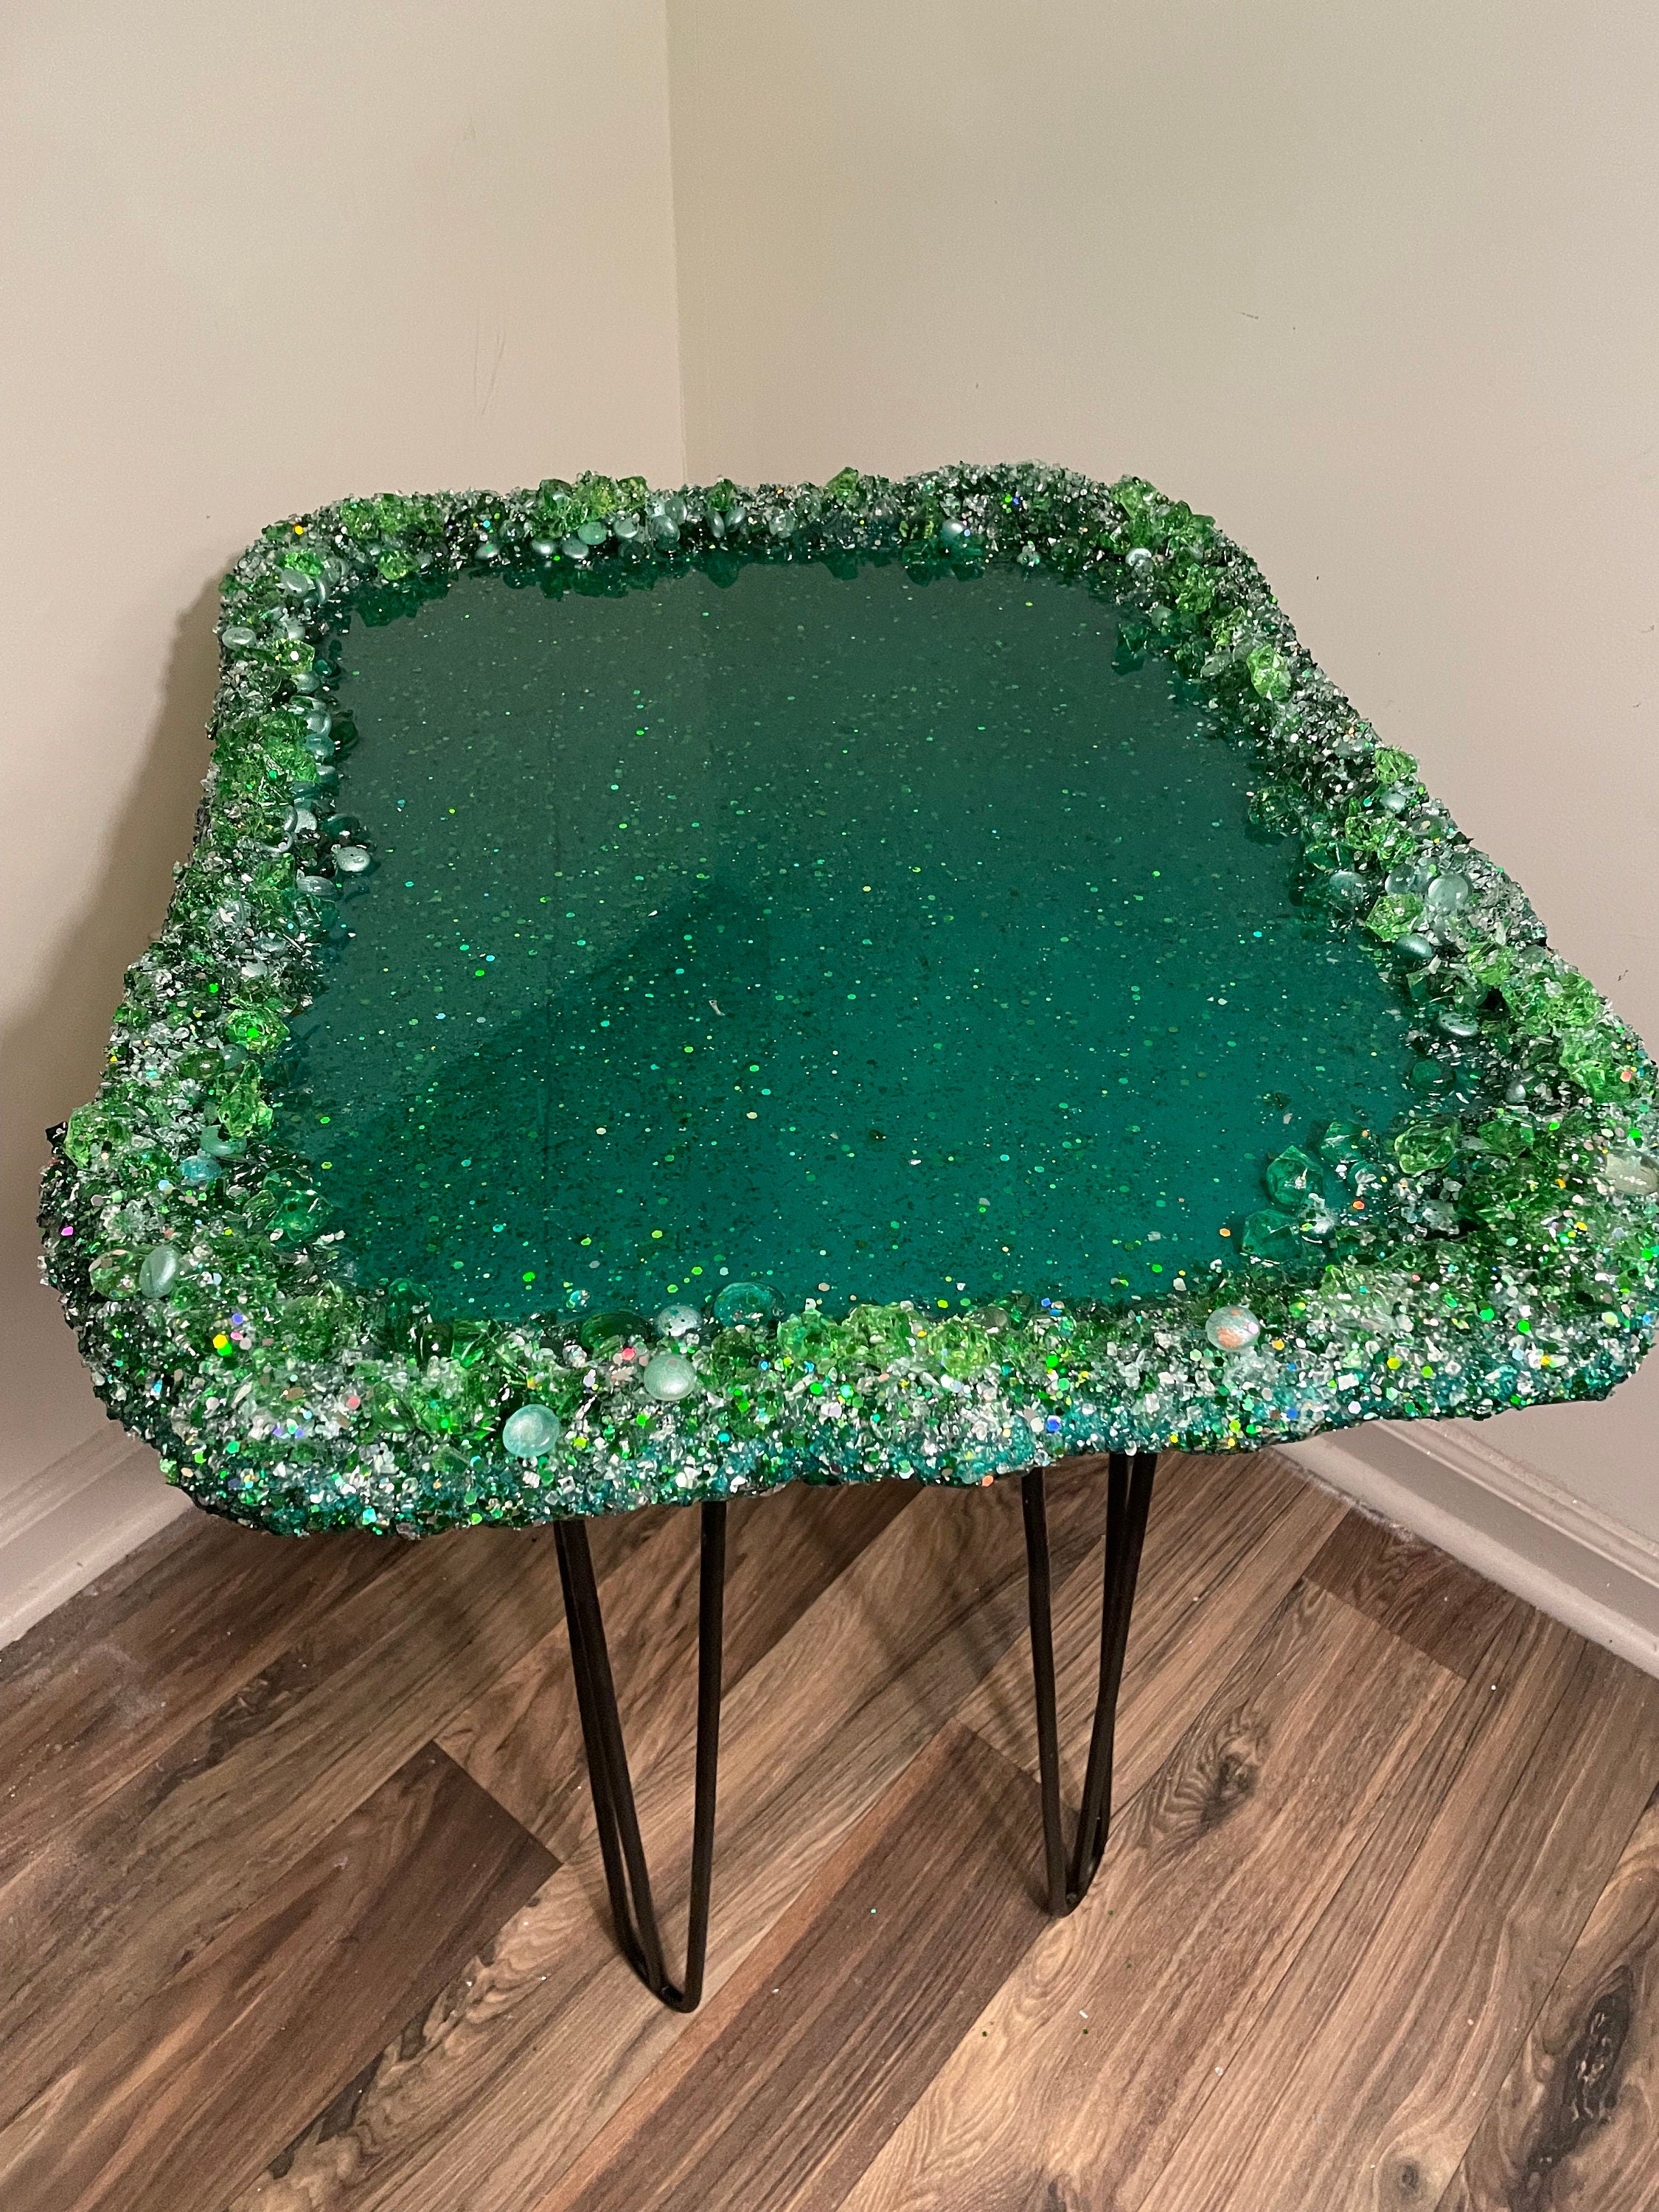 The Emerald Table